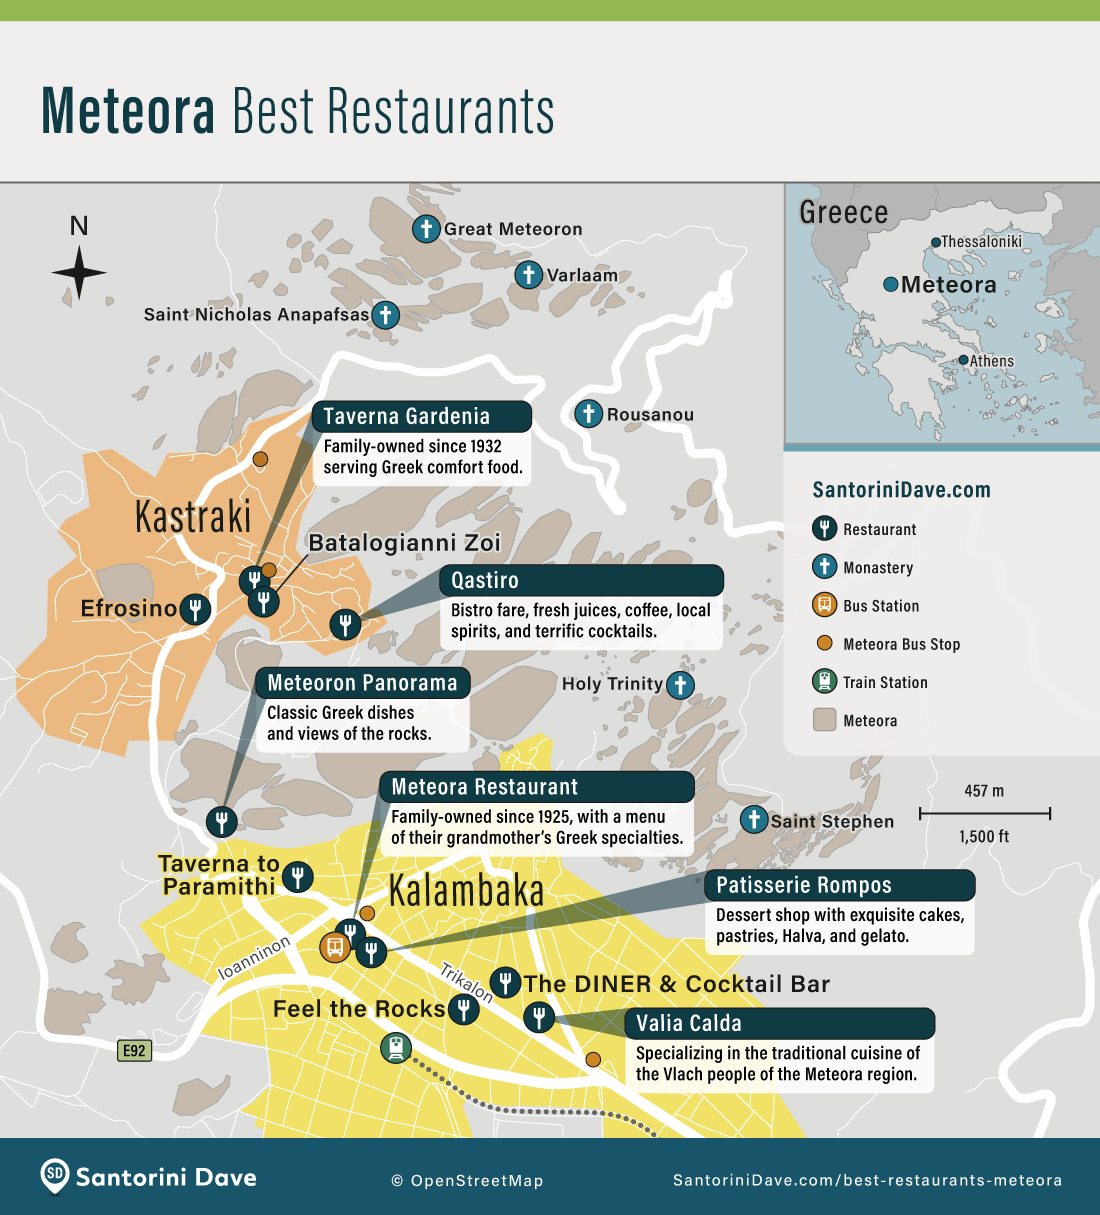 Map showing the locations of the best restaurants in Kalambaka and Kastraki near the Meteora